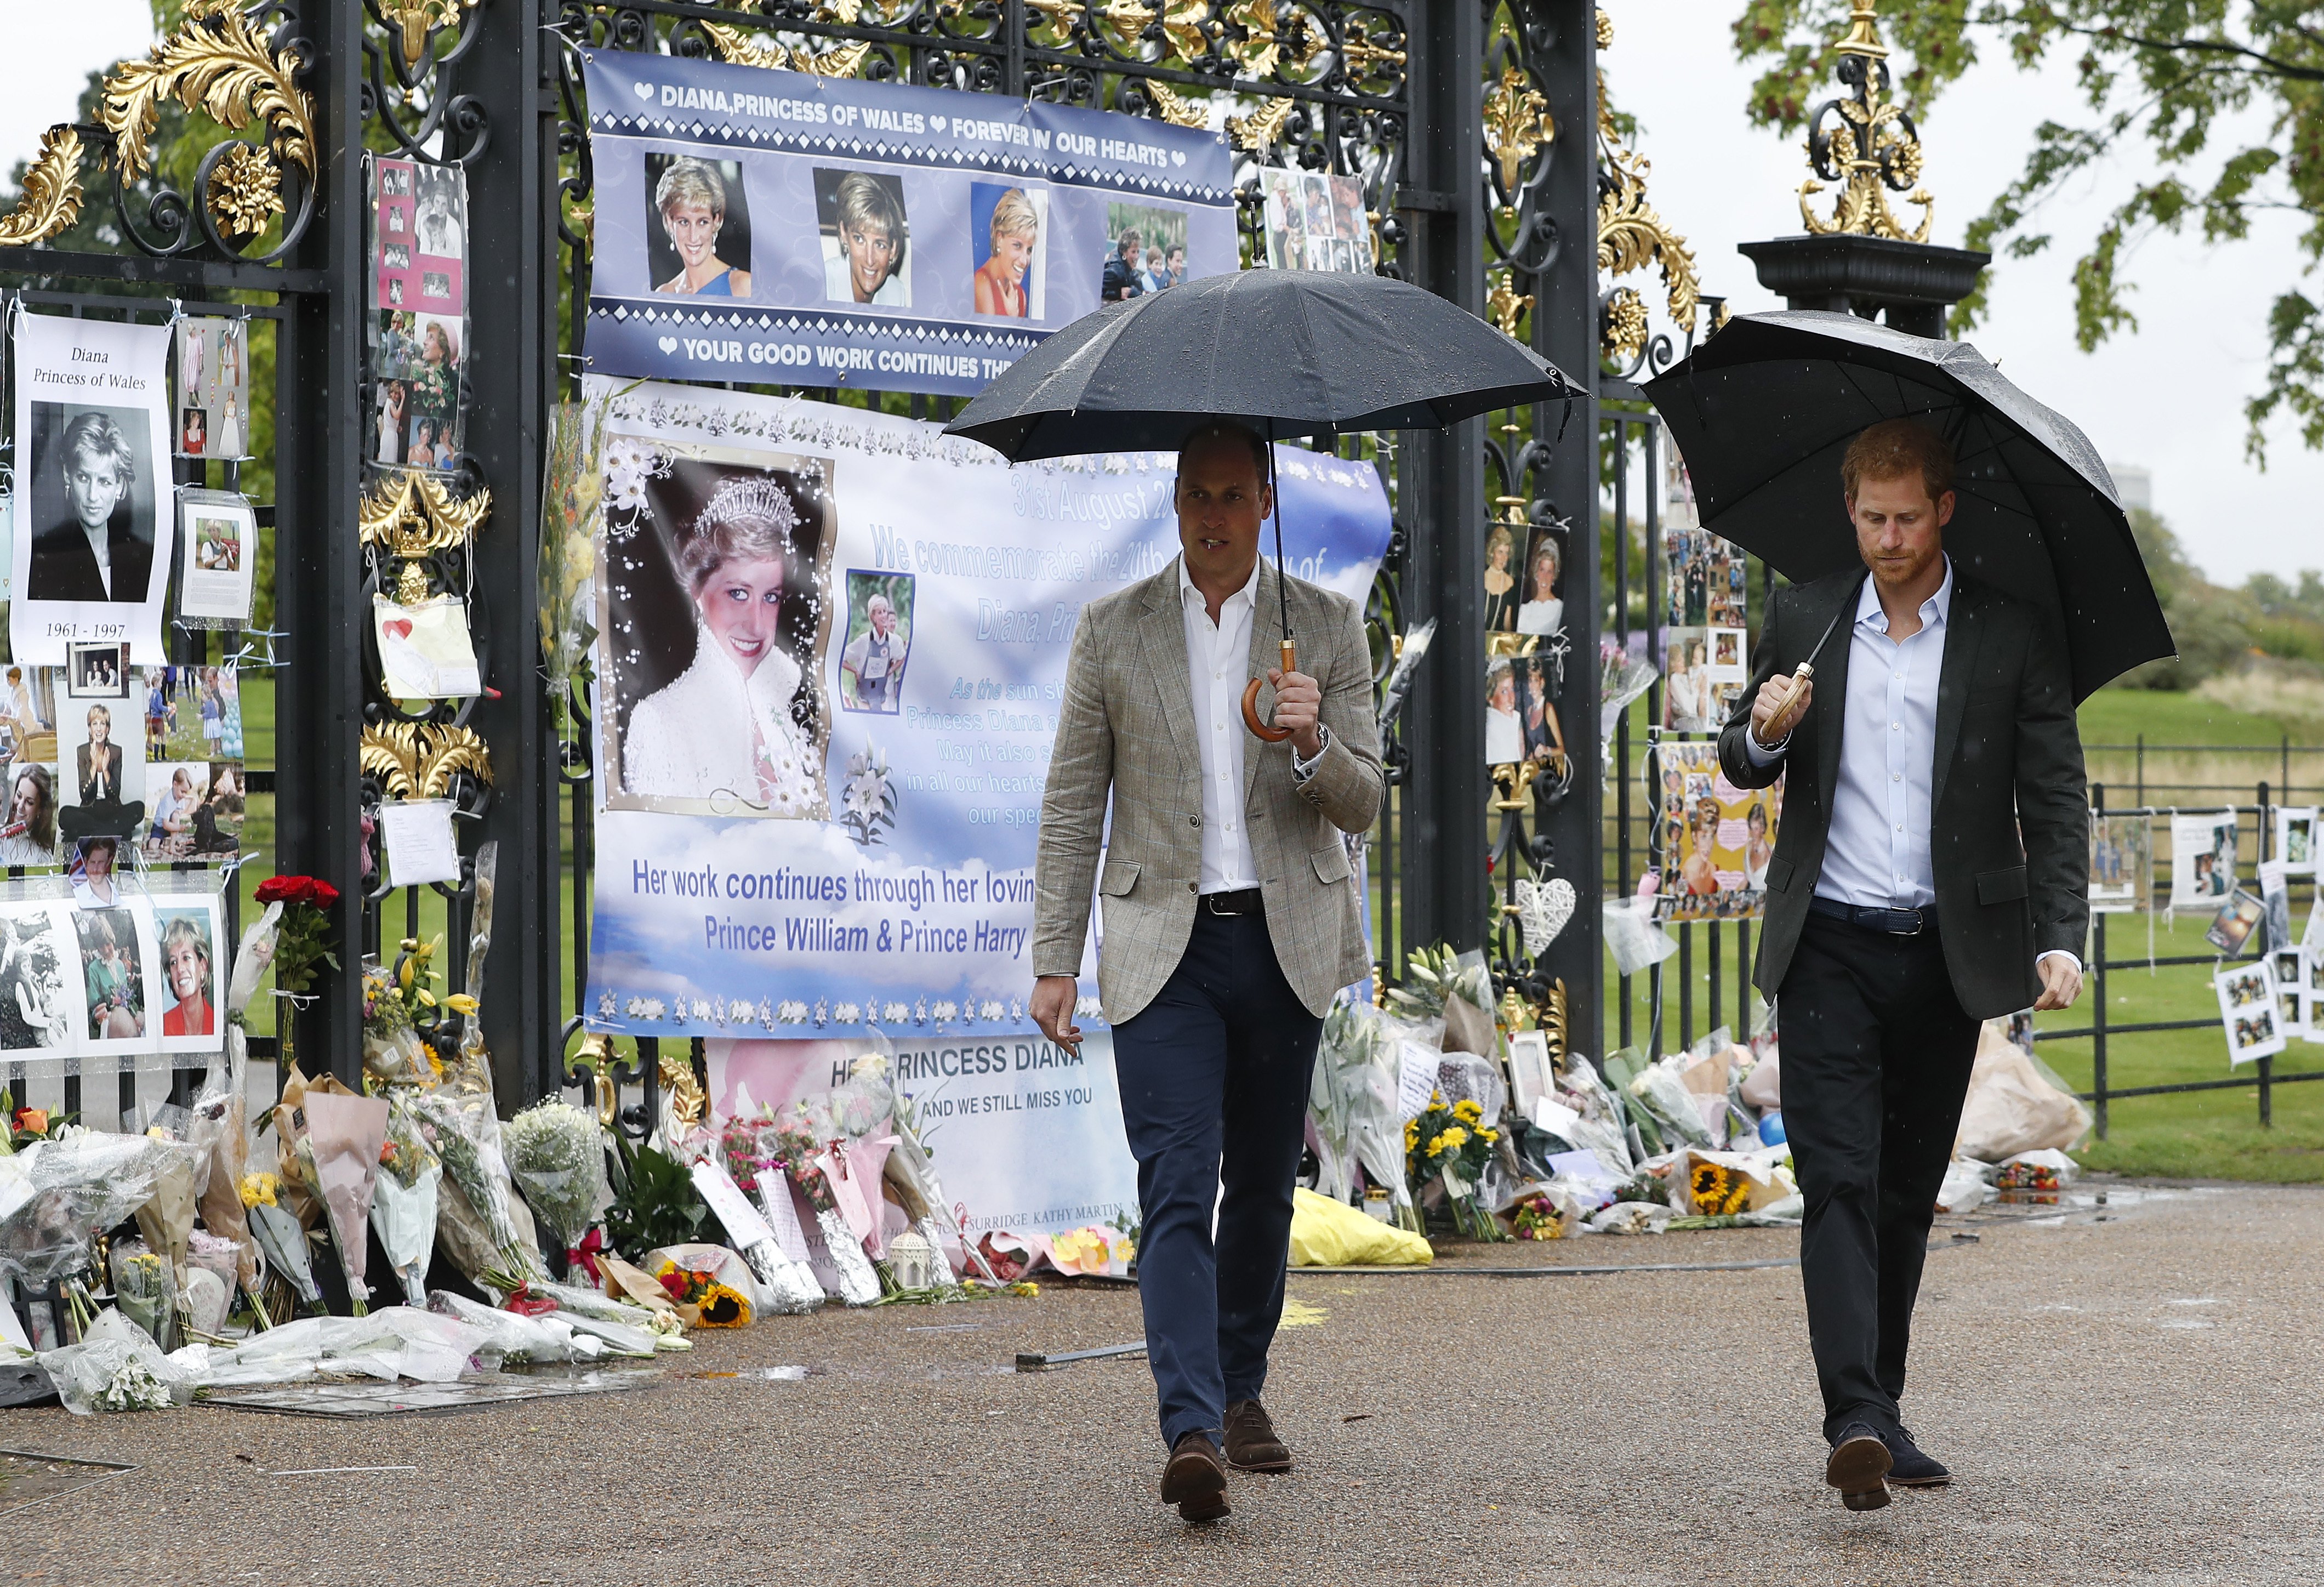 Prince William and Prince Harry walk away after placing flowers amongst the floral and pictorial tributes to their late mother, Princess Diana. | Source: Getty Images